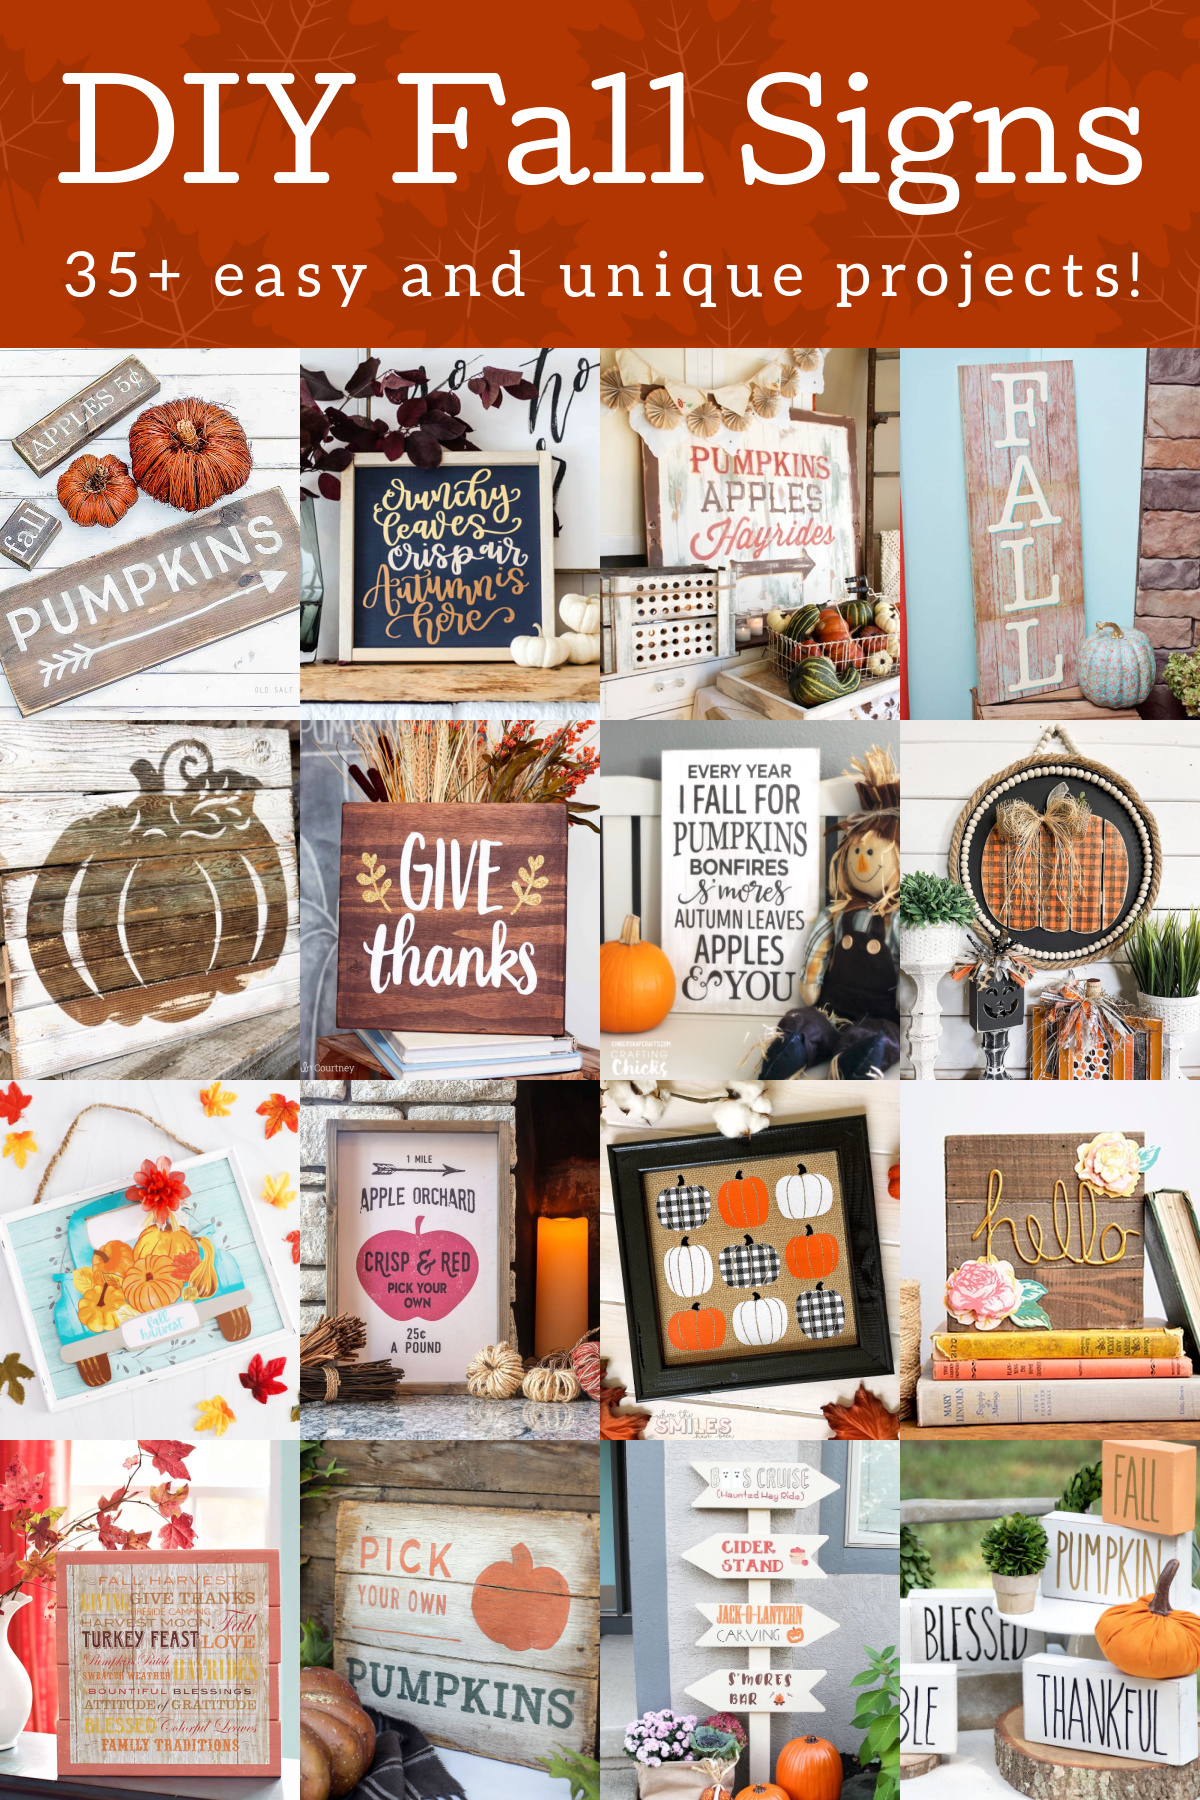 DIY Fall Signs for decorating